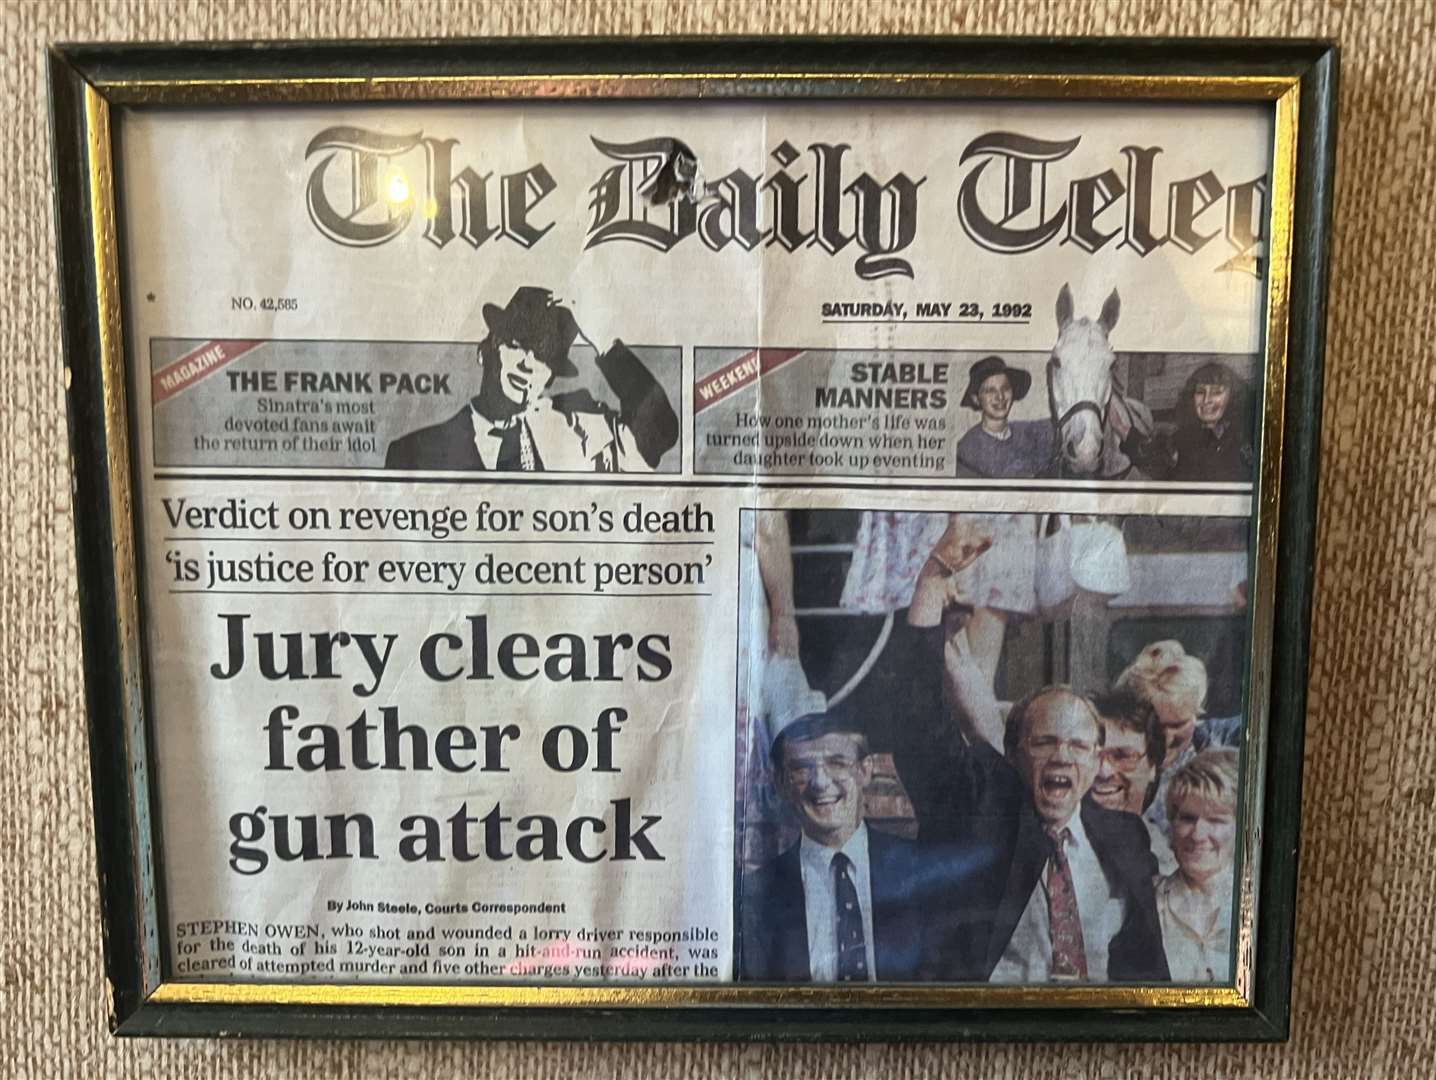 The newspaper clipping following Stephen Owen's trial